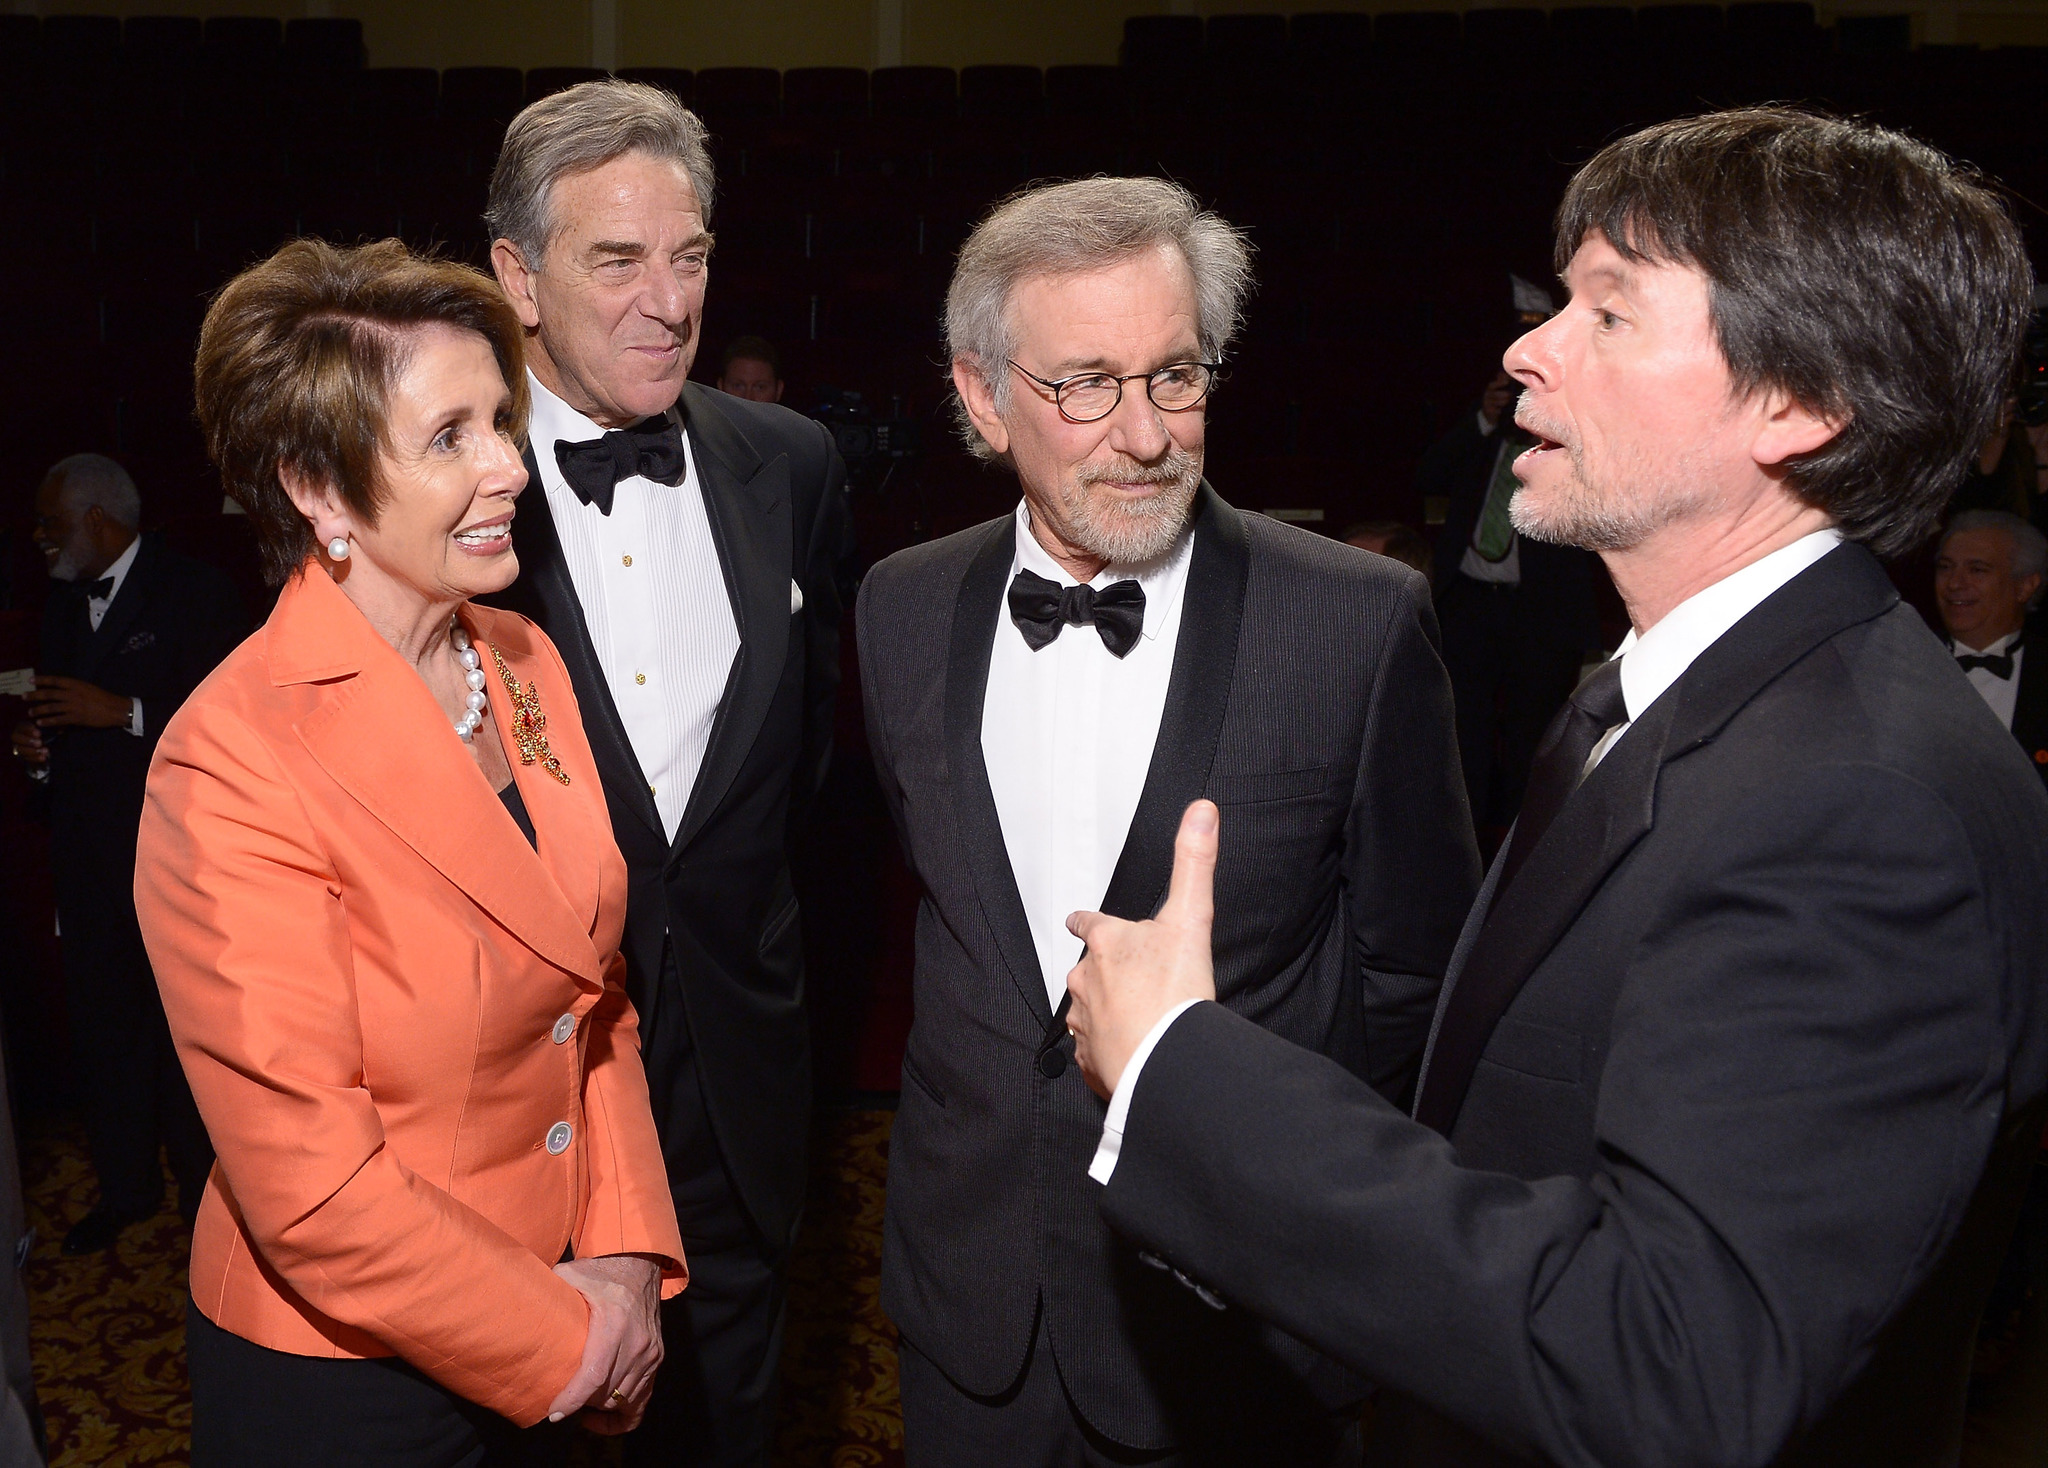 Minority Leader of the U.S. House of Representatives Nancy Pelosi, Paul Pelosi, filmmaker and honoree Steven Spielberg, and Foundation for the National Archives Board Vice President and Gala Chair Ken Burns view two facsimile versions of the 13th Amendment at the Foundation for the National Archives 2013 Records of Achievement award ceremony and gala in honor of Steven Spielberg on November 19, 2013 in Washington, D.C.